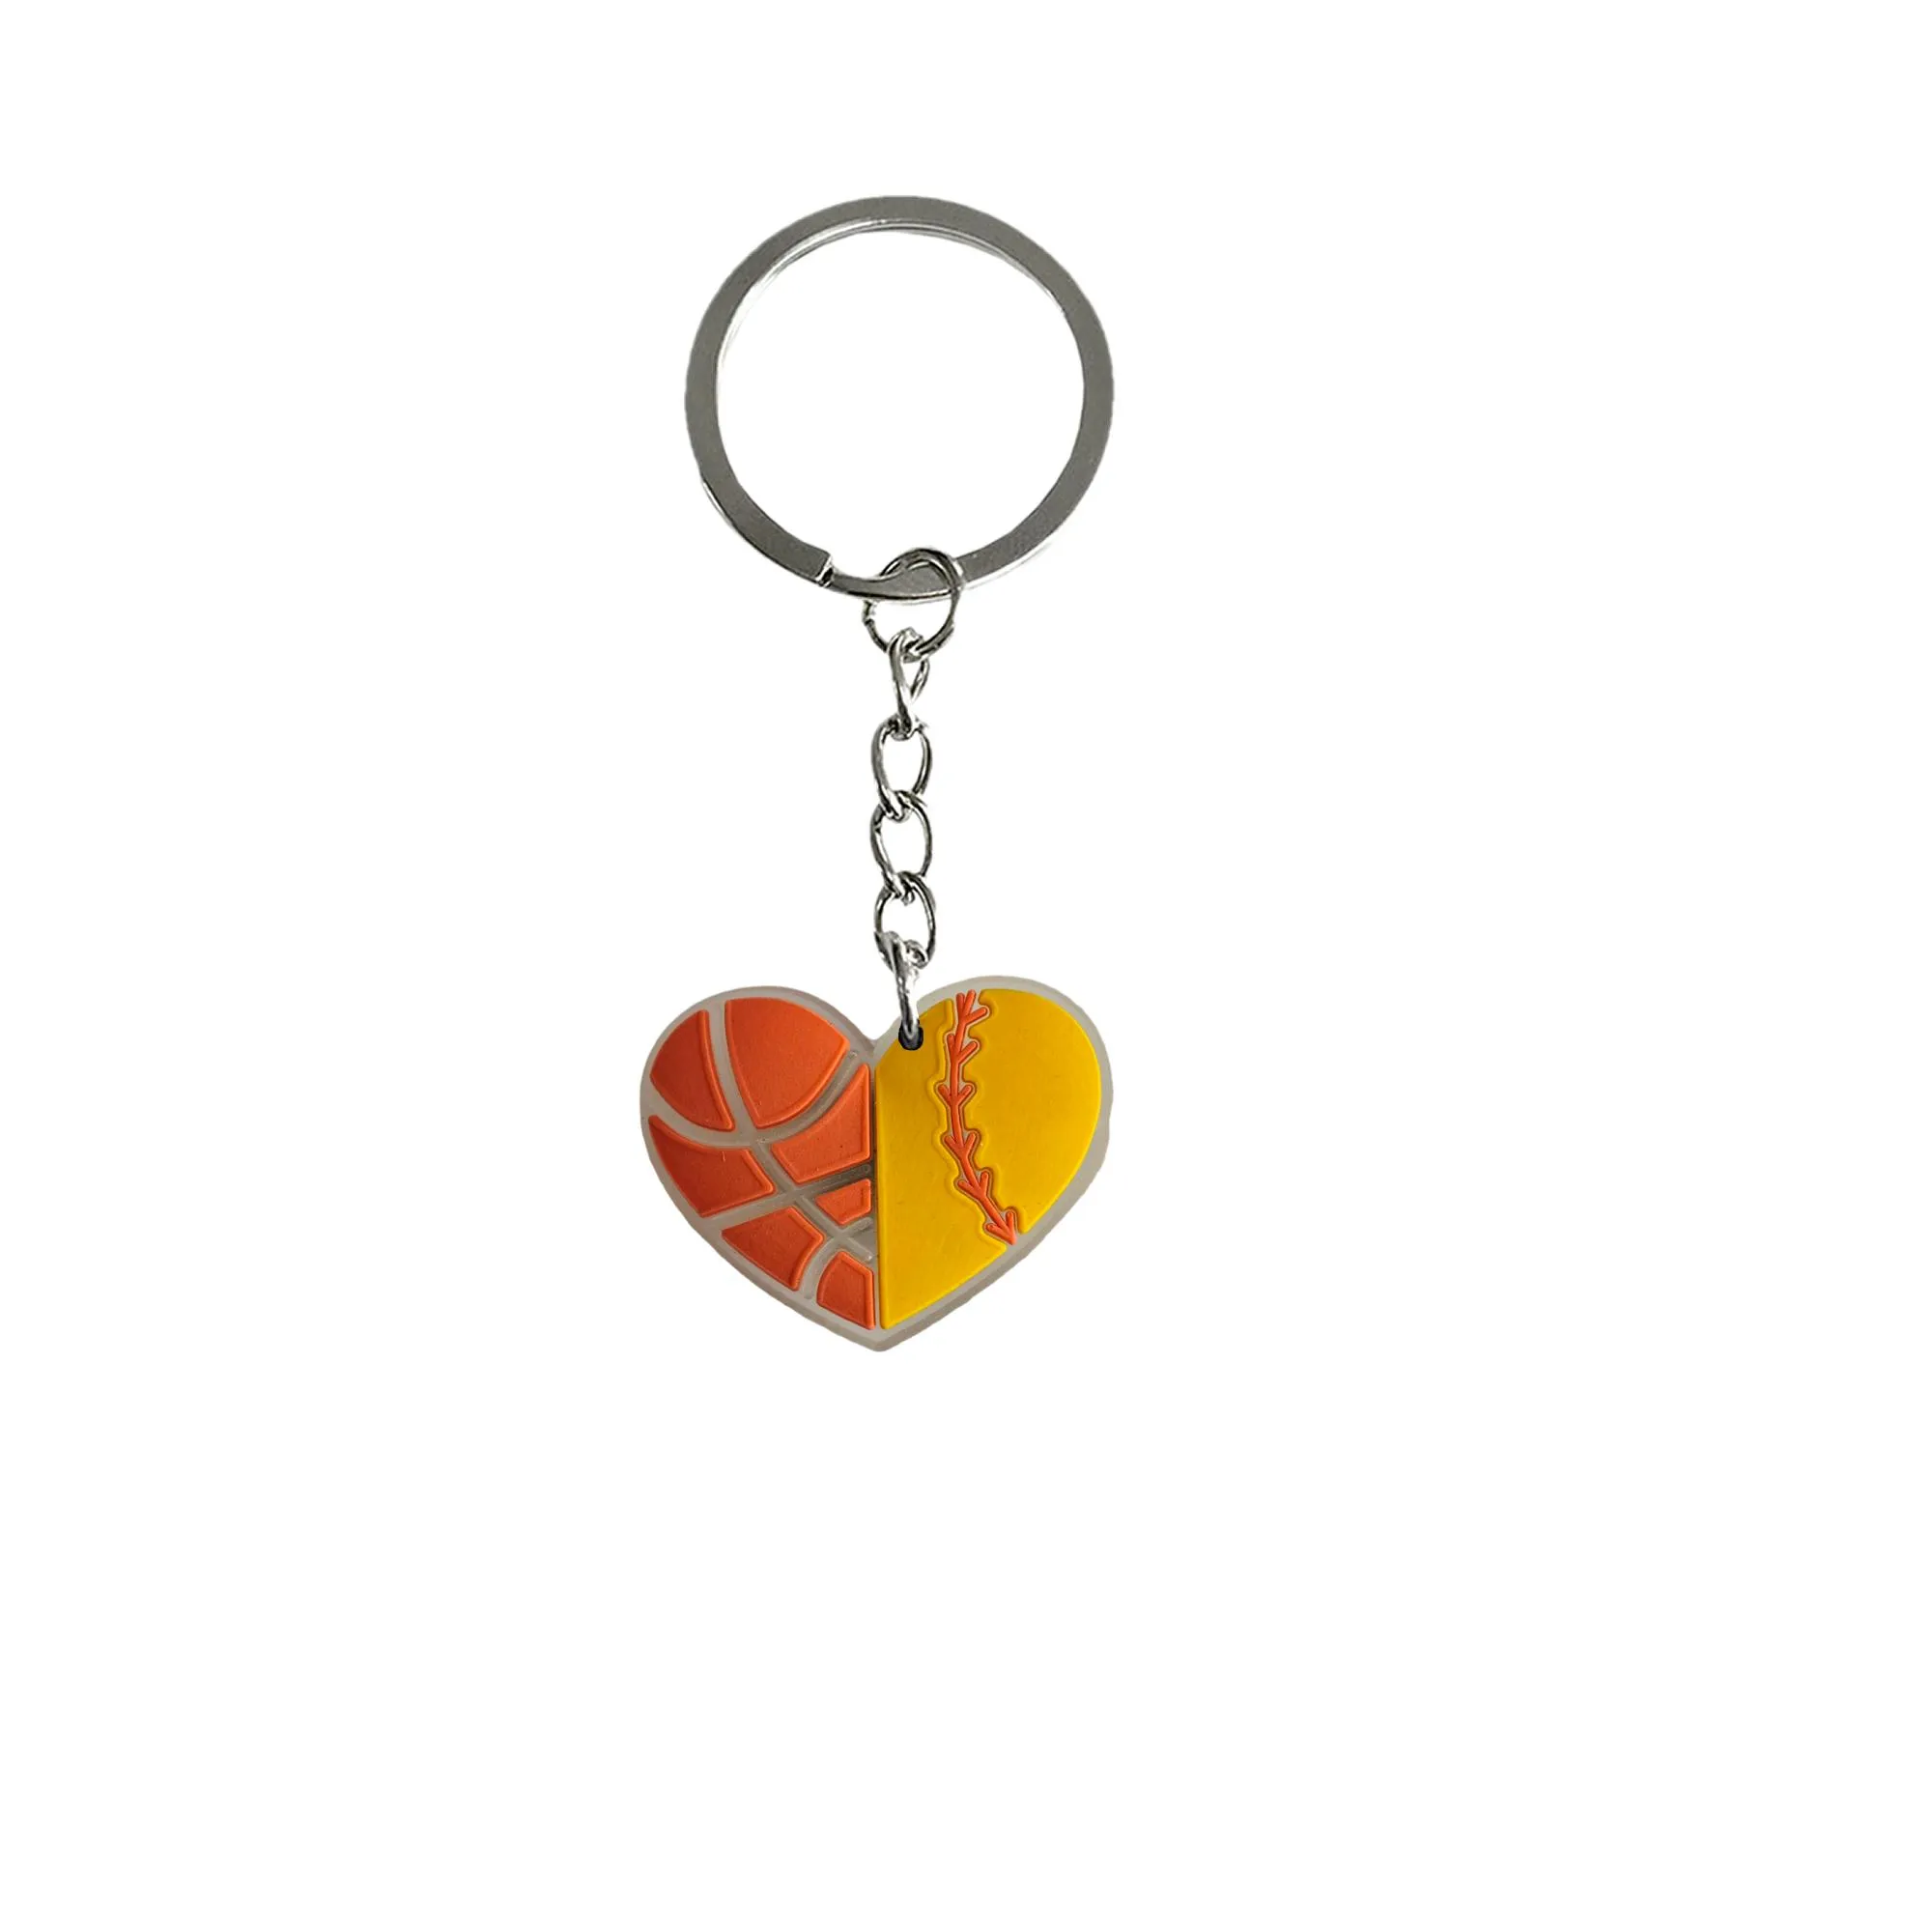 fluorescent basketball park 10 keychain cute silicone key chain for adult gift kids party favors keychains backpack keyring suitable schoolbag school day birthday supplies goodie bag stuffers